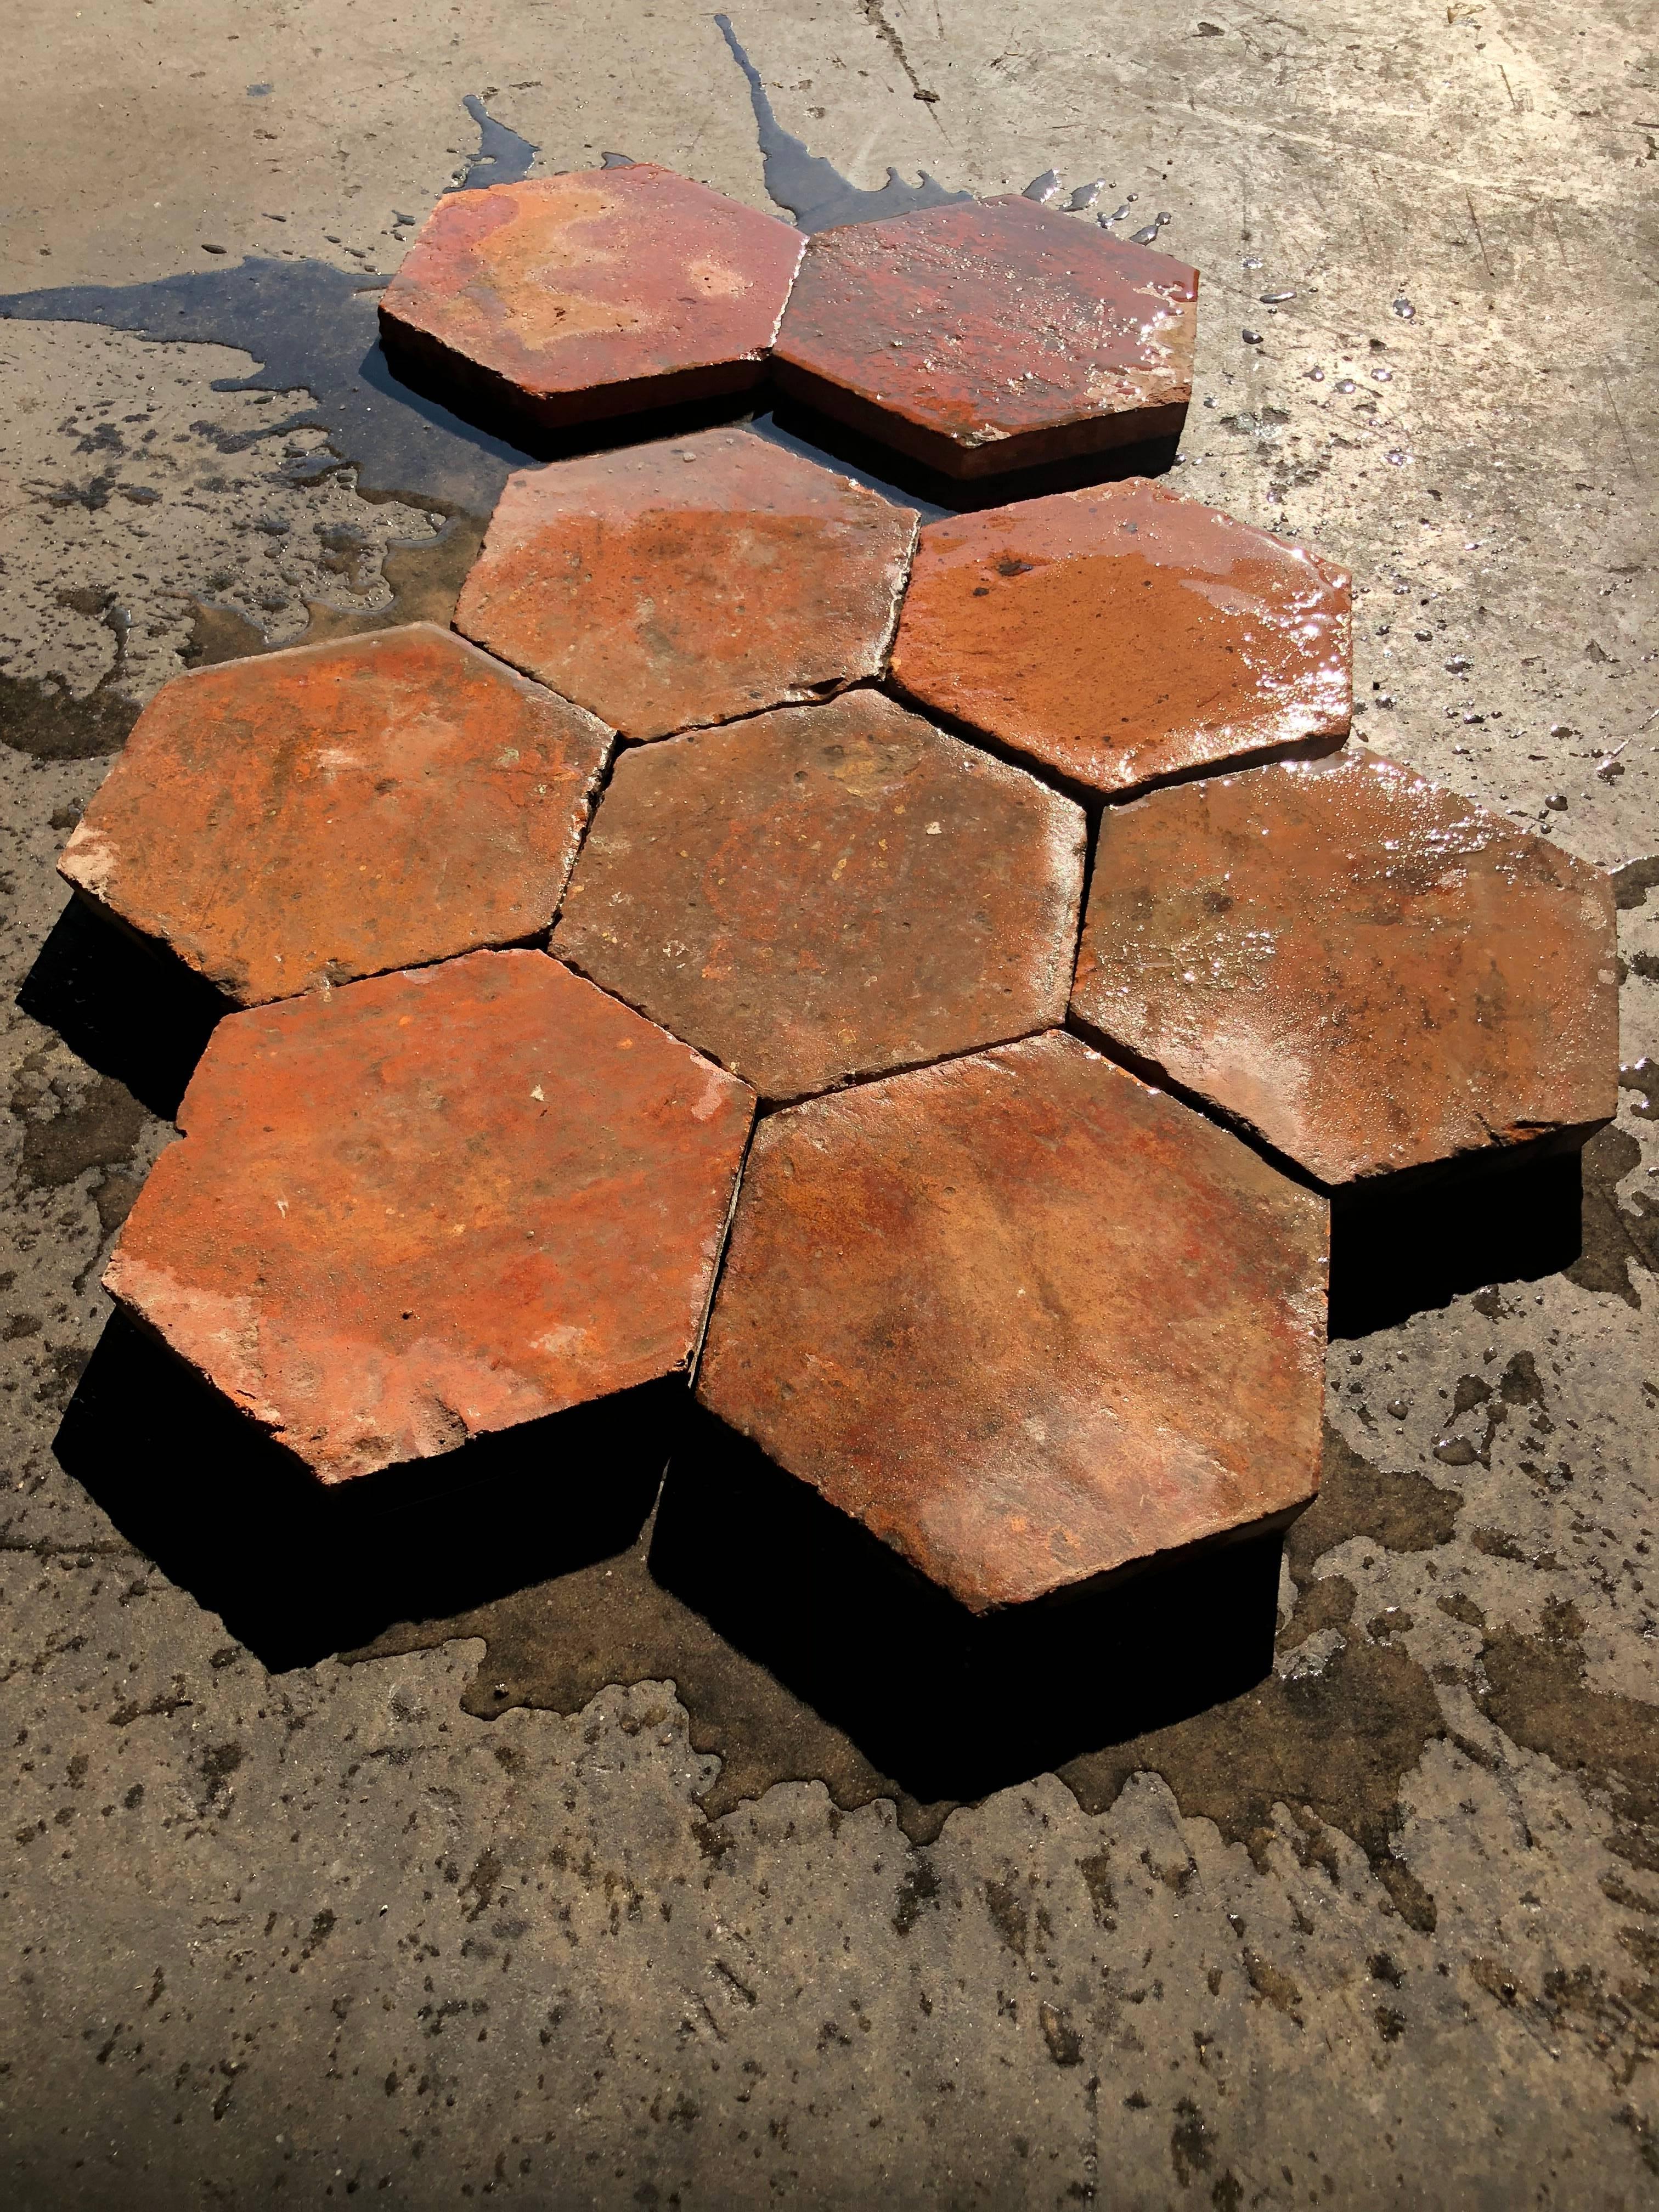 Original and authentic French antique terra cotta flooring hexagonal 18th century from south of Paris.
Rare and unique quality, in excellent condition, with original patina.
We have about 5,000 square foot available, ready for